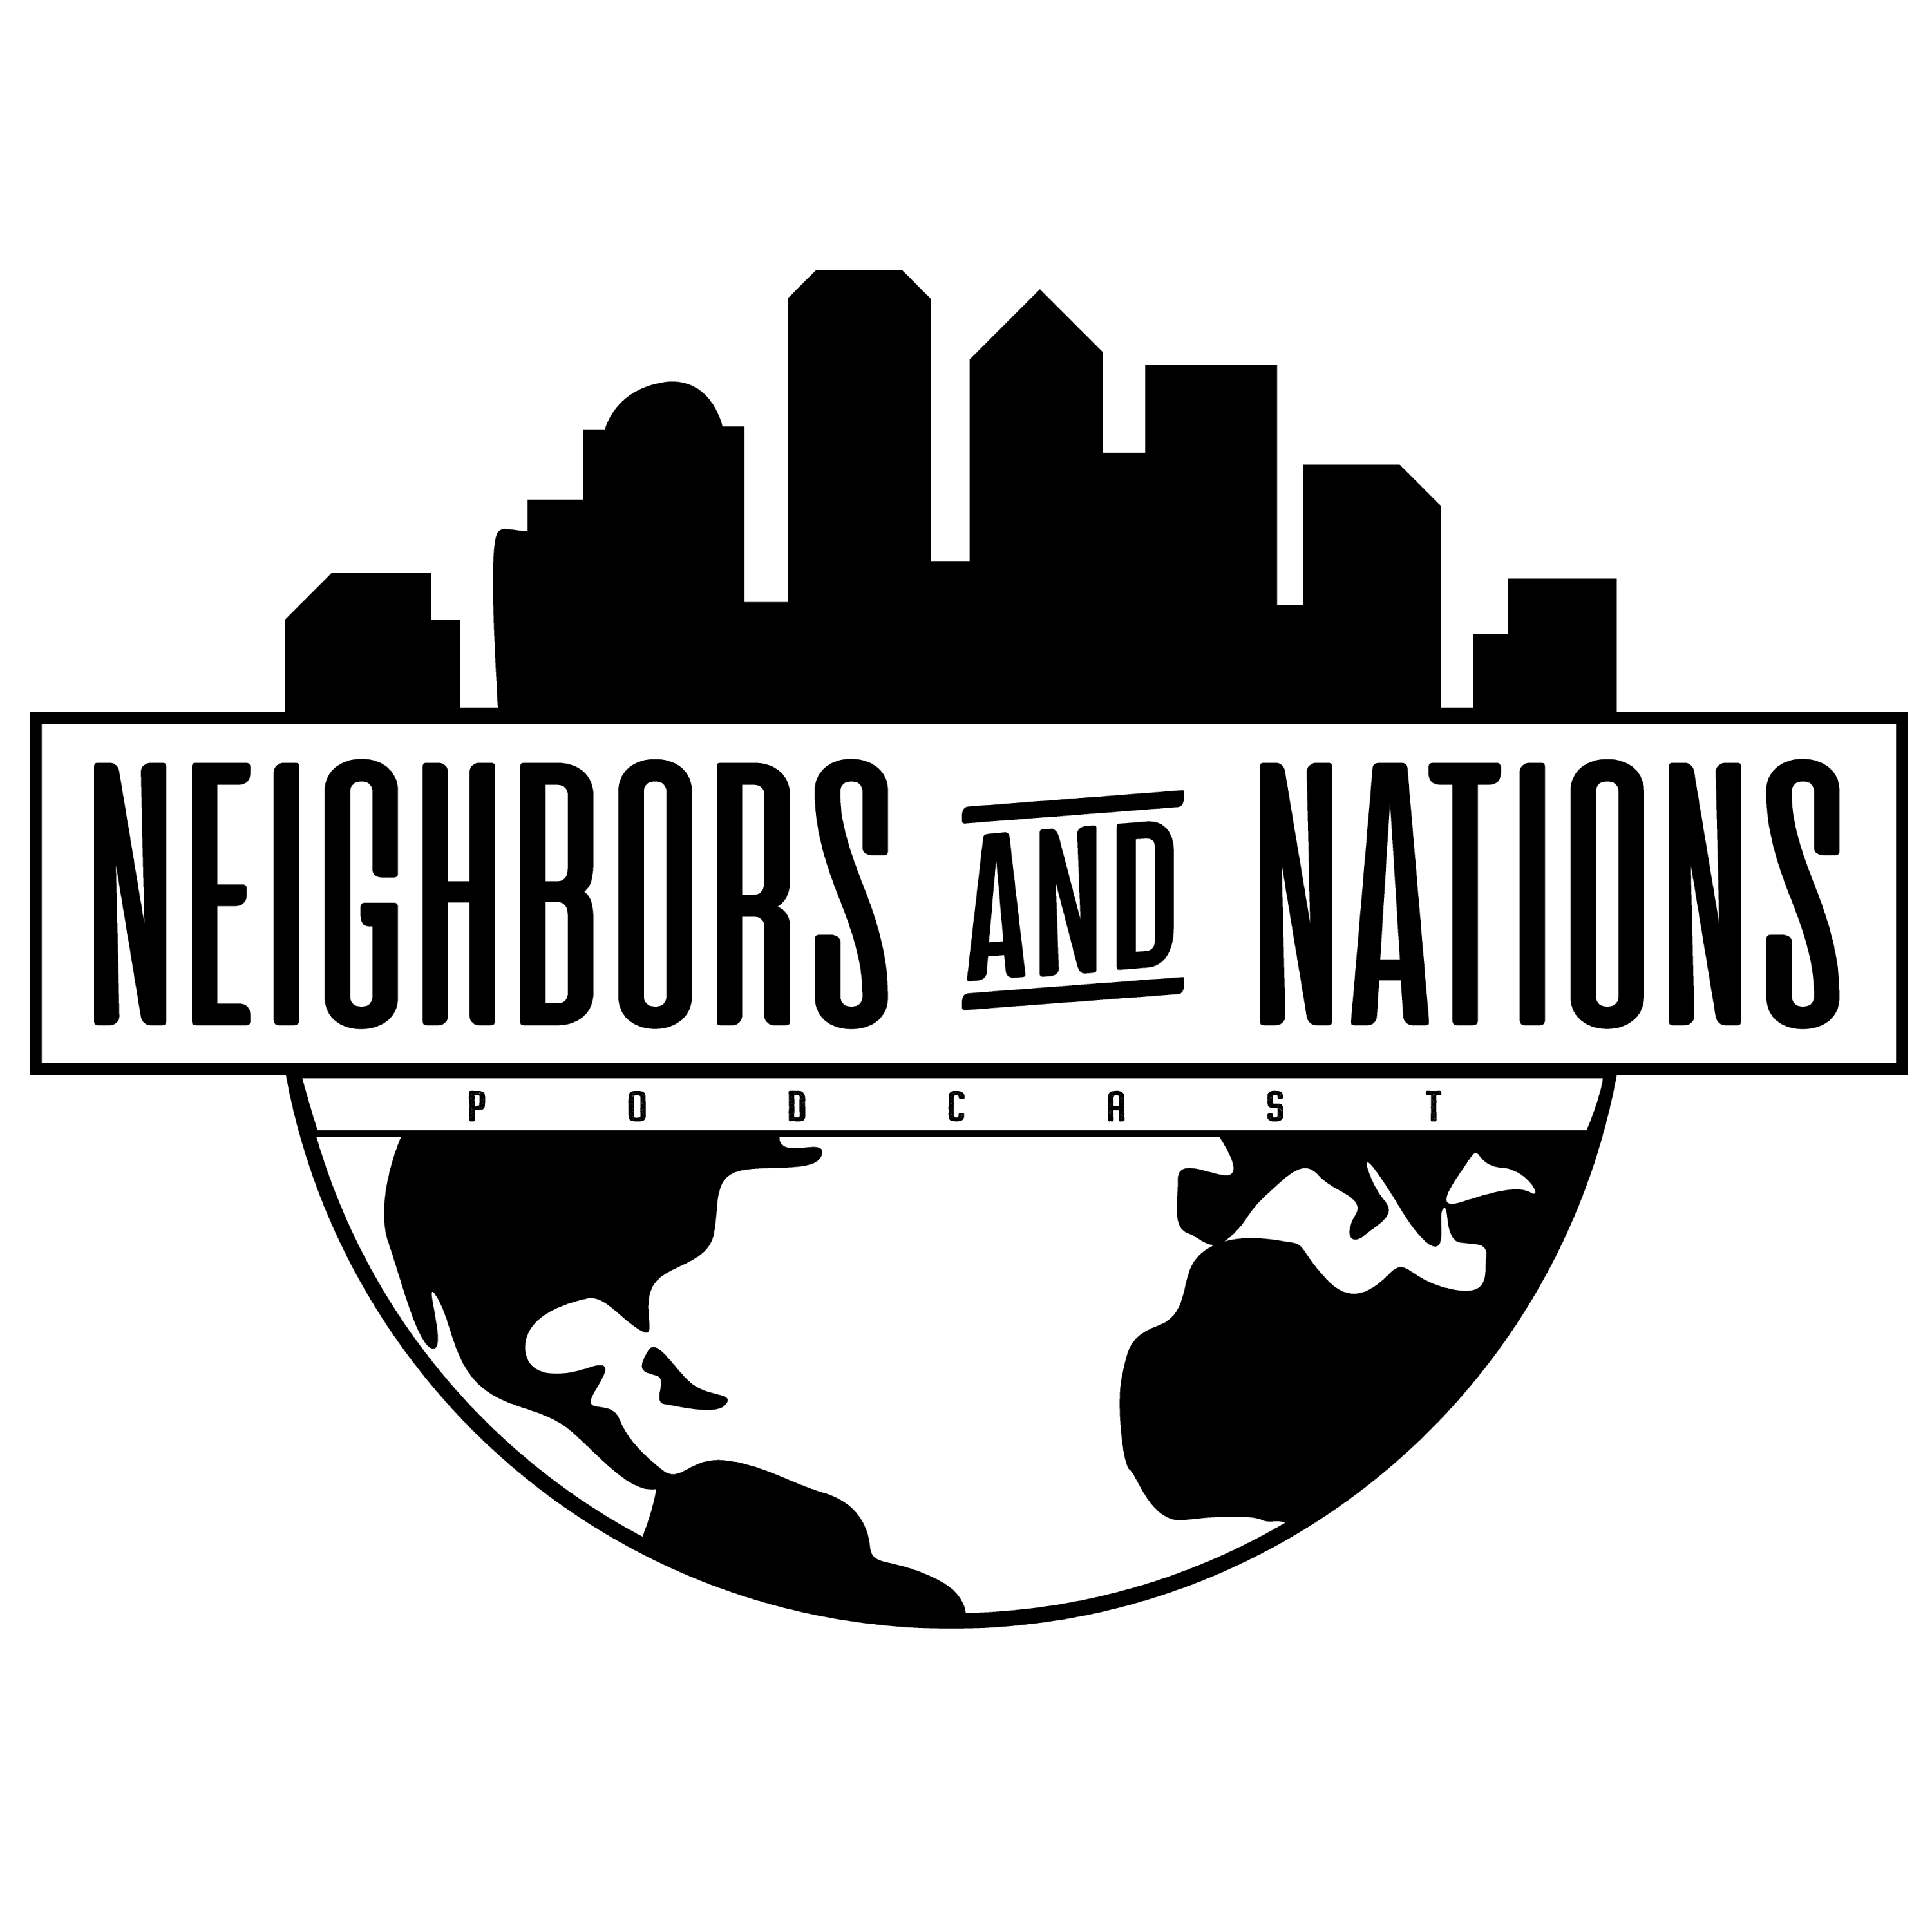 Neighbors and Nations